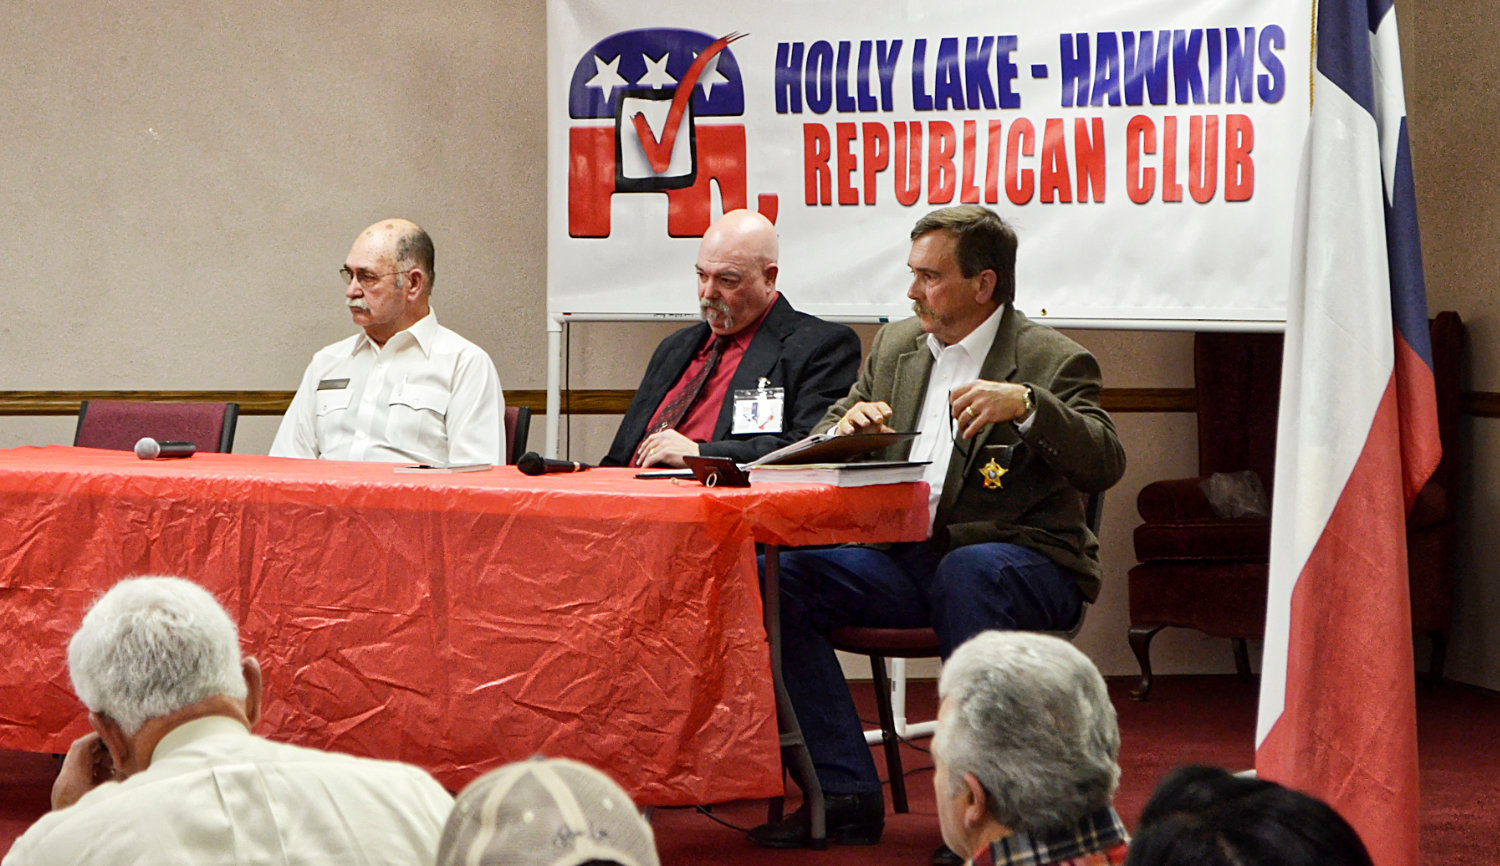 Wood County sheriff’s candidates, from left, James Schaffner, Kelly Cole and Tom Castloo field questions during a forum at Holly Lake Ranch Monday. Callie Lawrence was unable to attend.